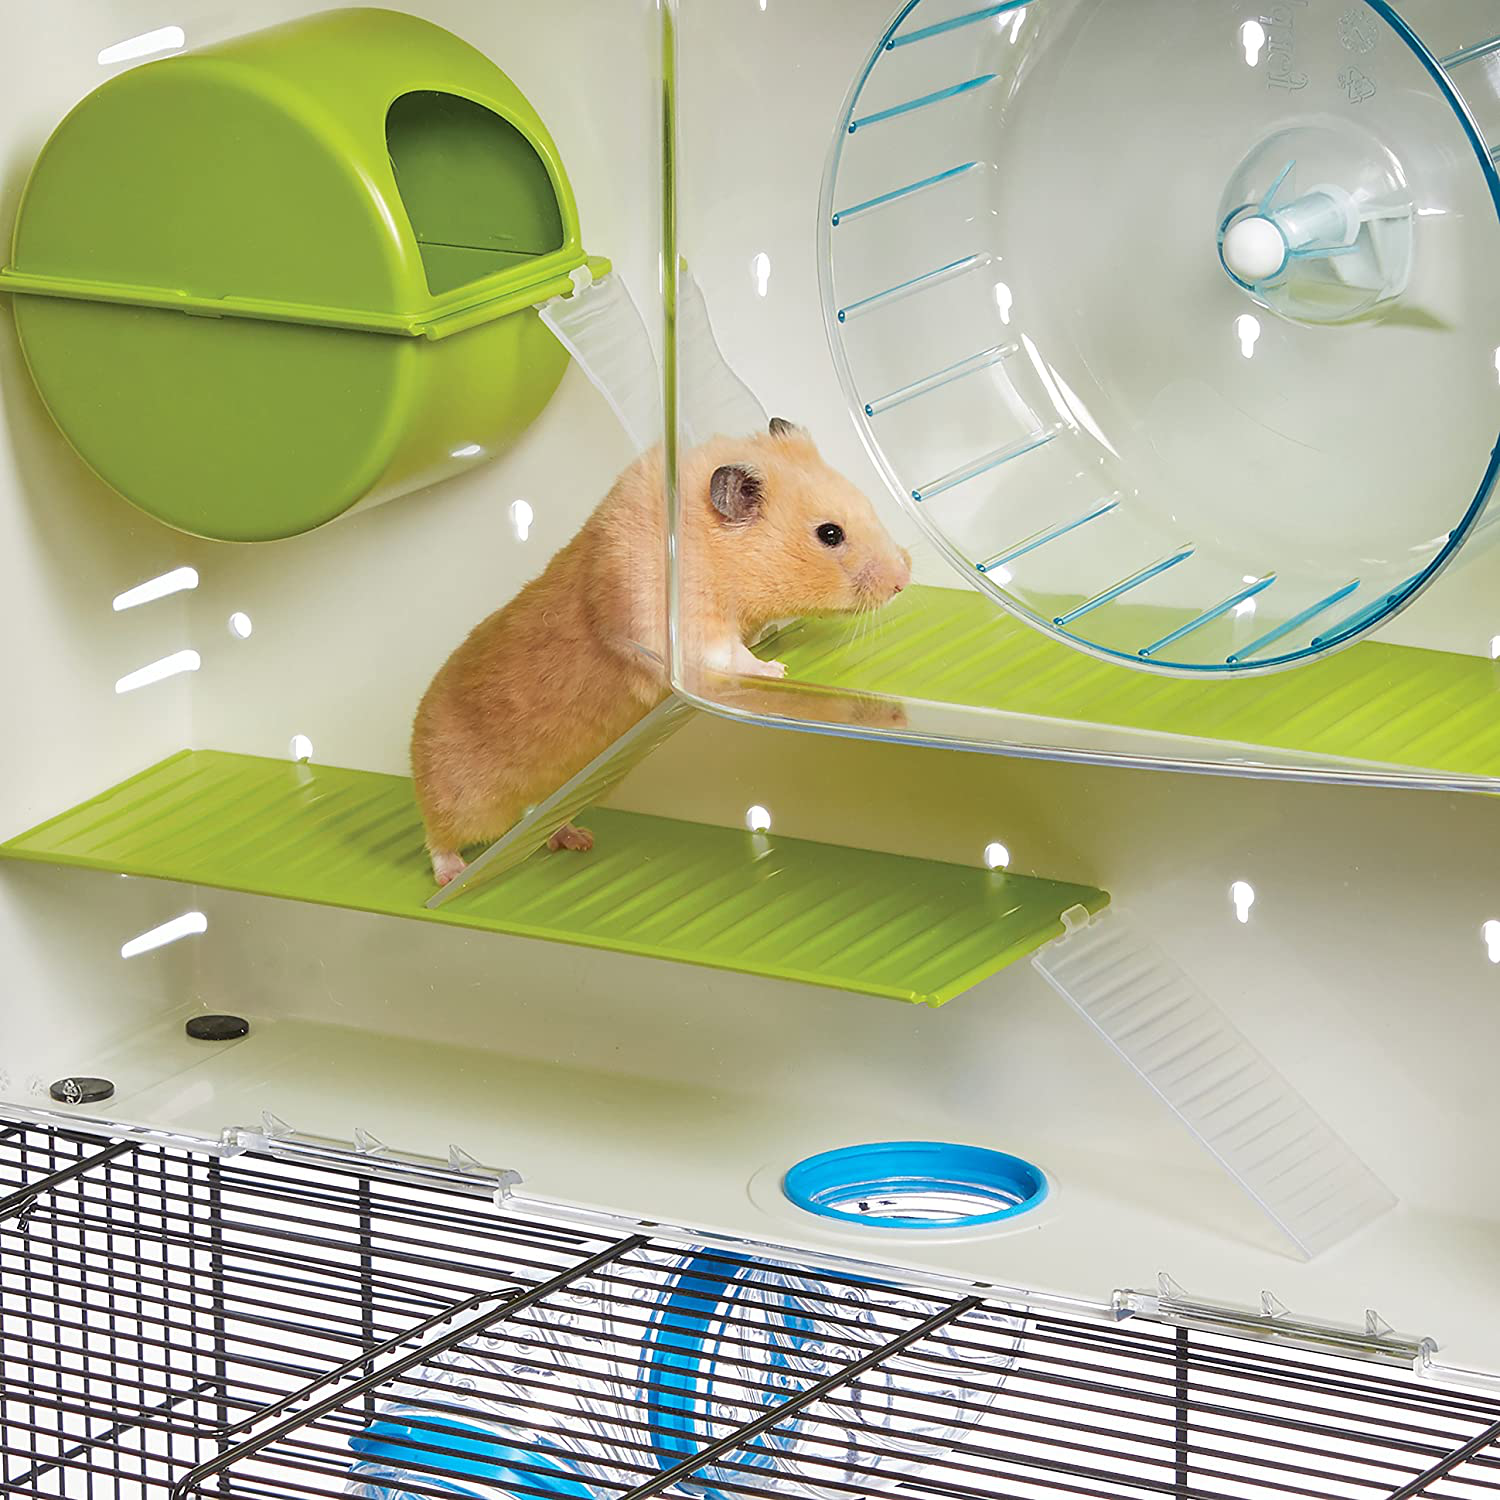 Midwest Critterville Arcade Hamster Cage